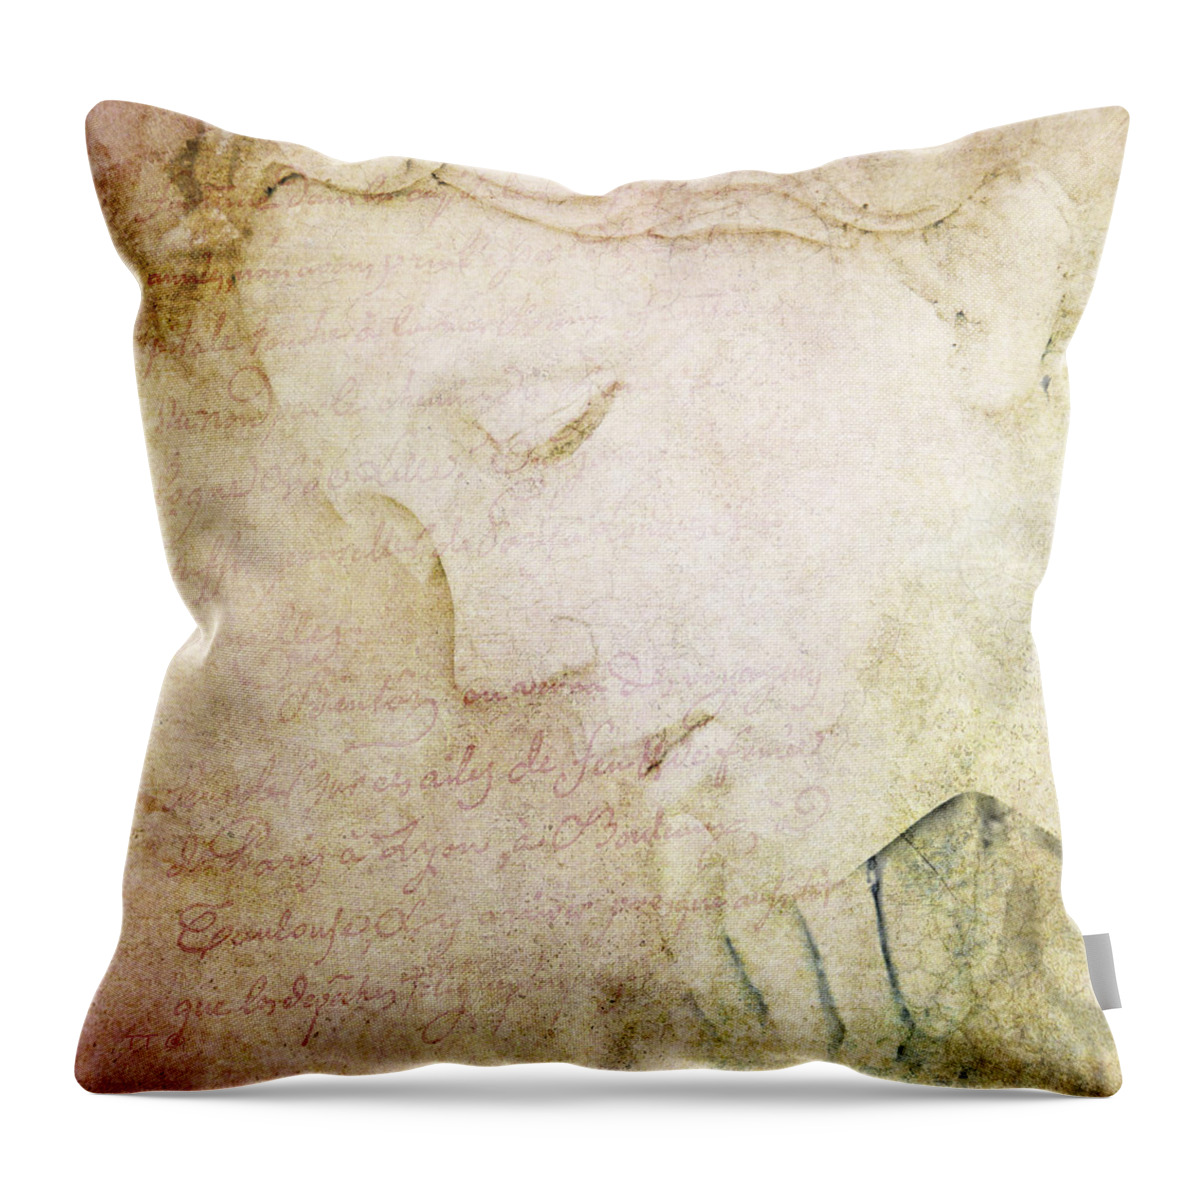 Theresa Tahara Throw Pillow featuring the photograph Lettre A Mon Amour by Theresa Tahara